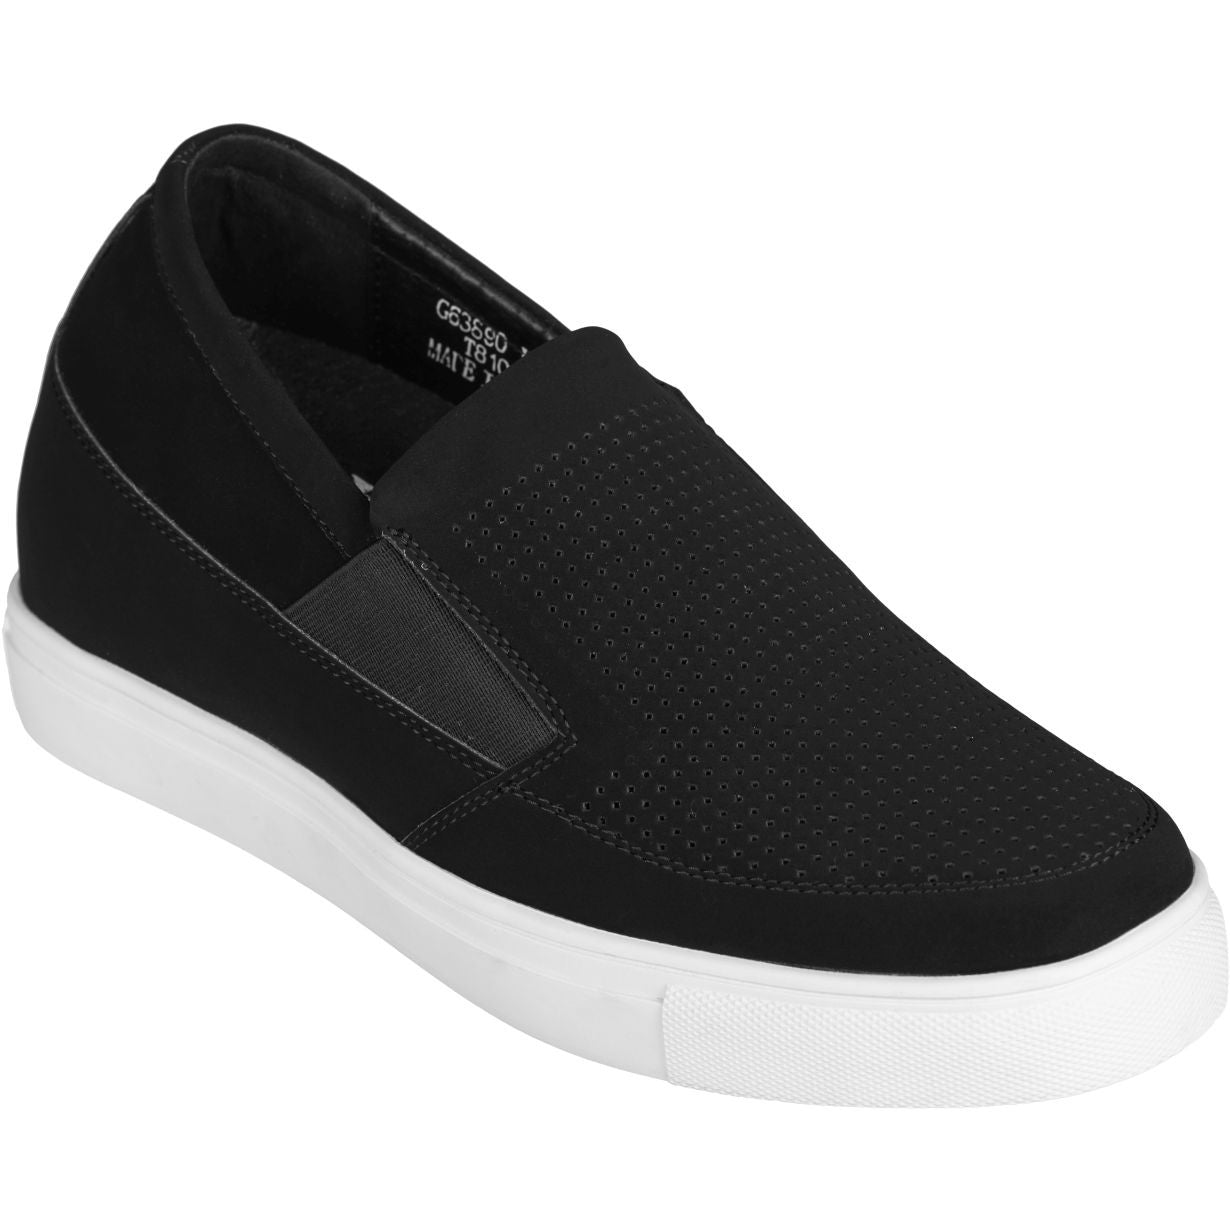 Elevator shoes height increase 3-Inch Taller Lightweight Slip-On Black CALTO Sneakers G63890